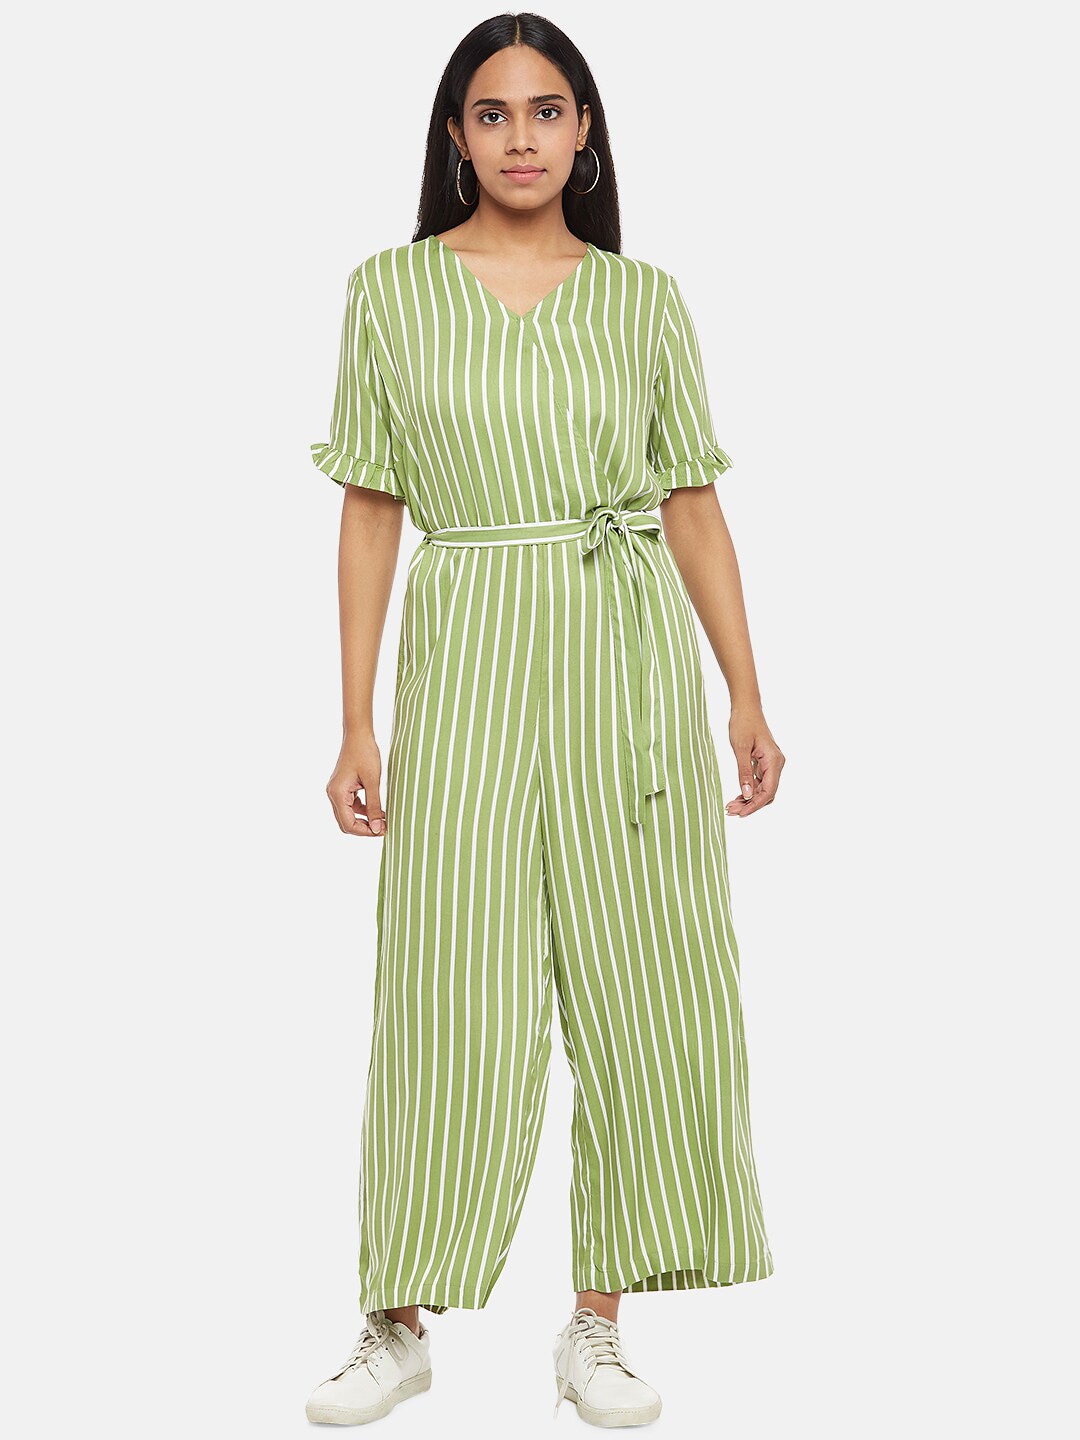 Honey by Pantaloons Green & White Striped Basic Jumpsuit Price in India